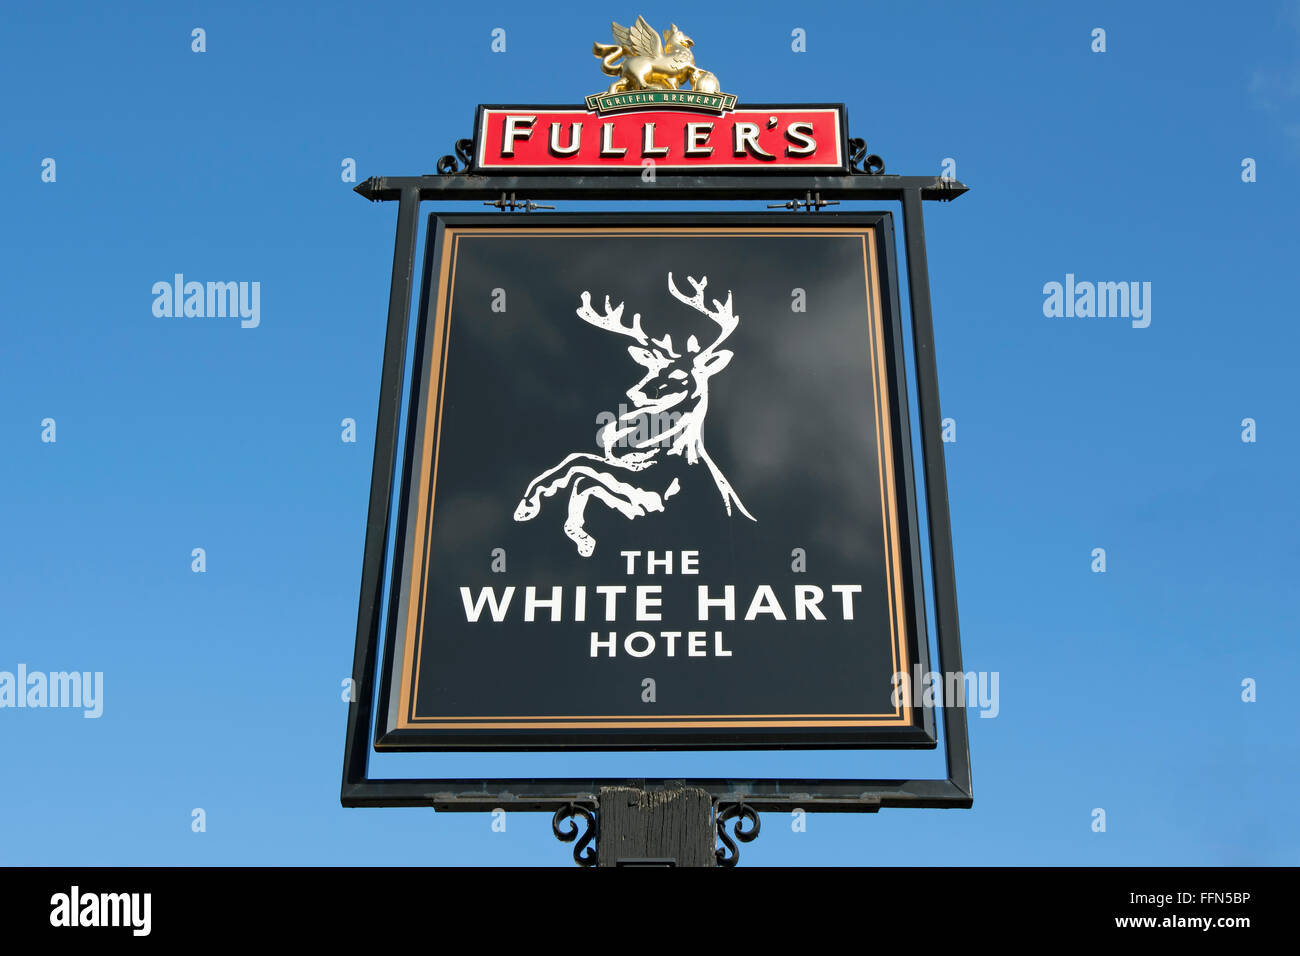 pub sign for the white hart hotel, owned by fuller's brewery, hampton wick, england Stock Photo